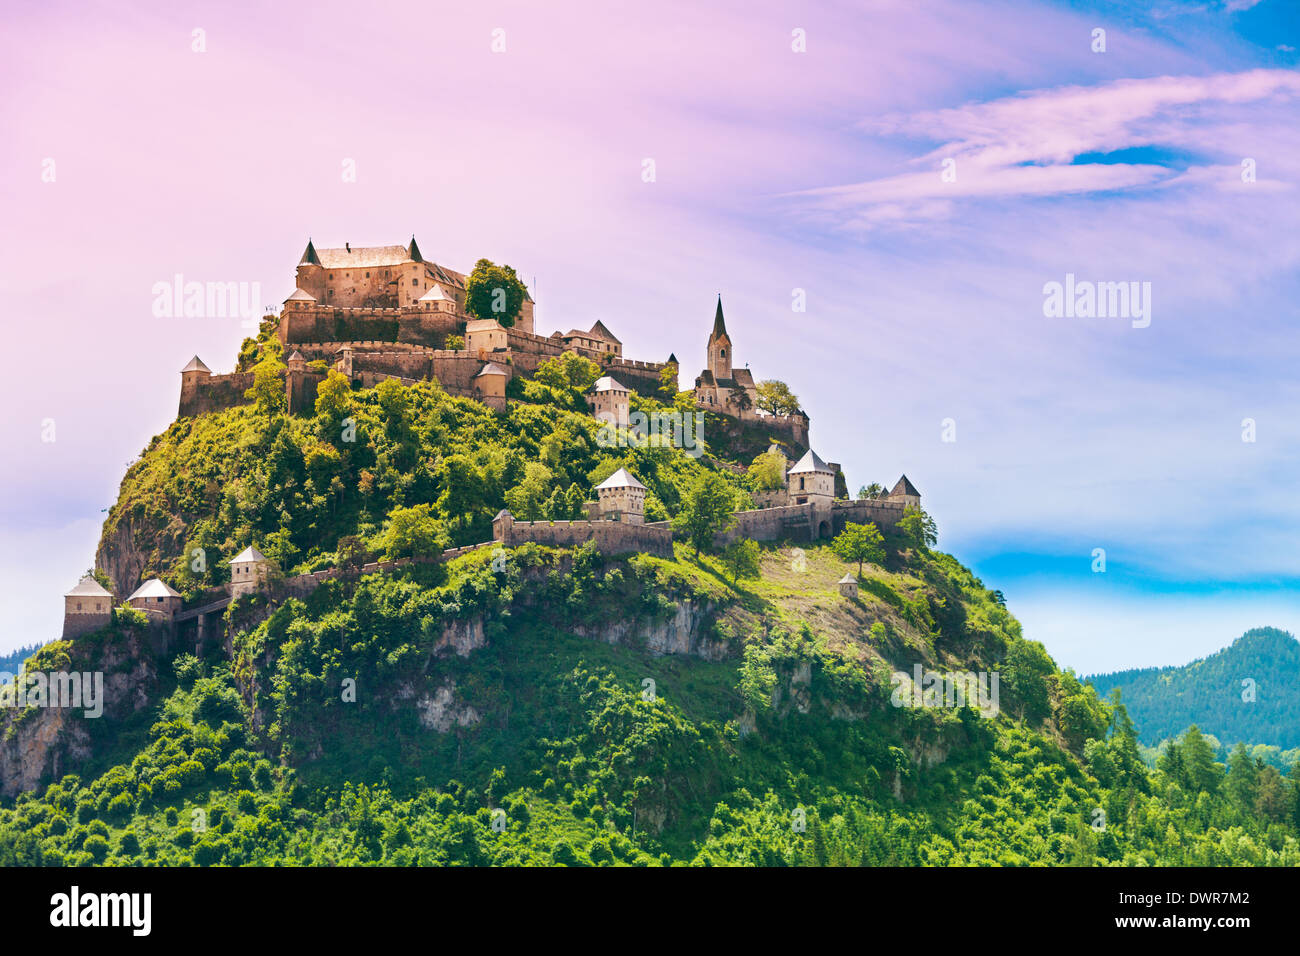 Hochosterwitz castle mountain view in Austria with long walls and many towers  Stock Photo